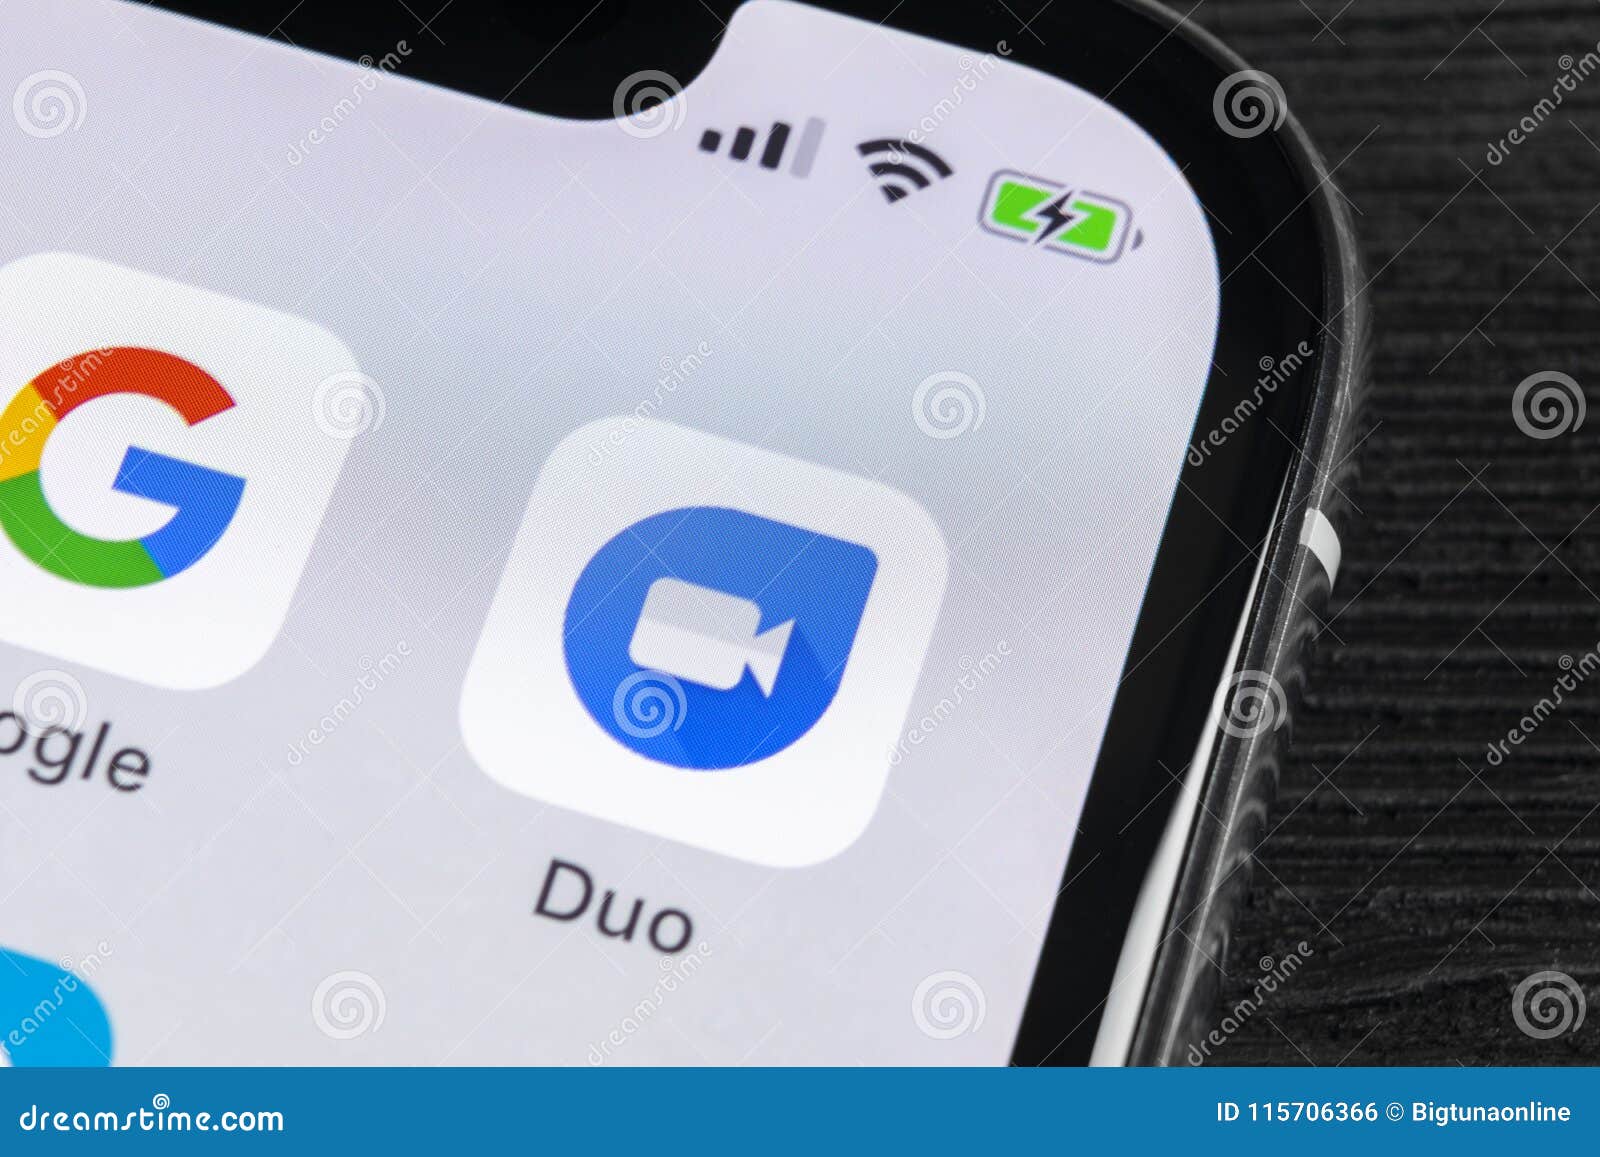 https www dreamstime com google duo application icon apple iphone smartphone screen close up google duo app icon social network social media icon image115706366